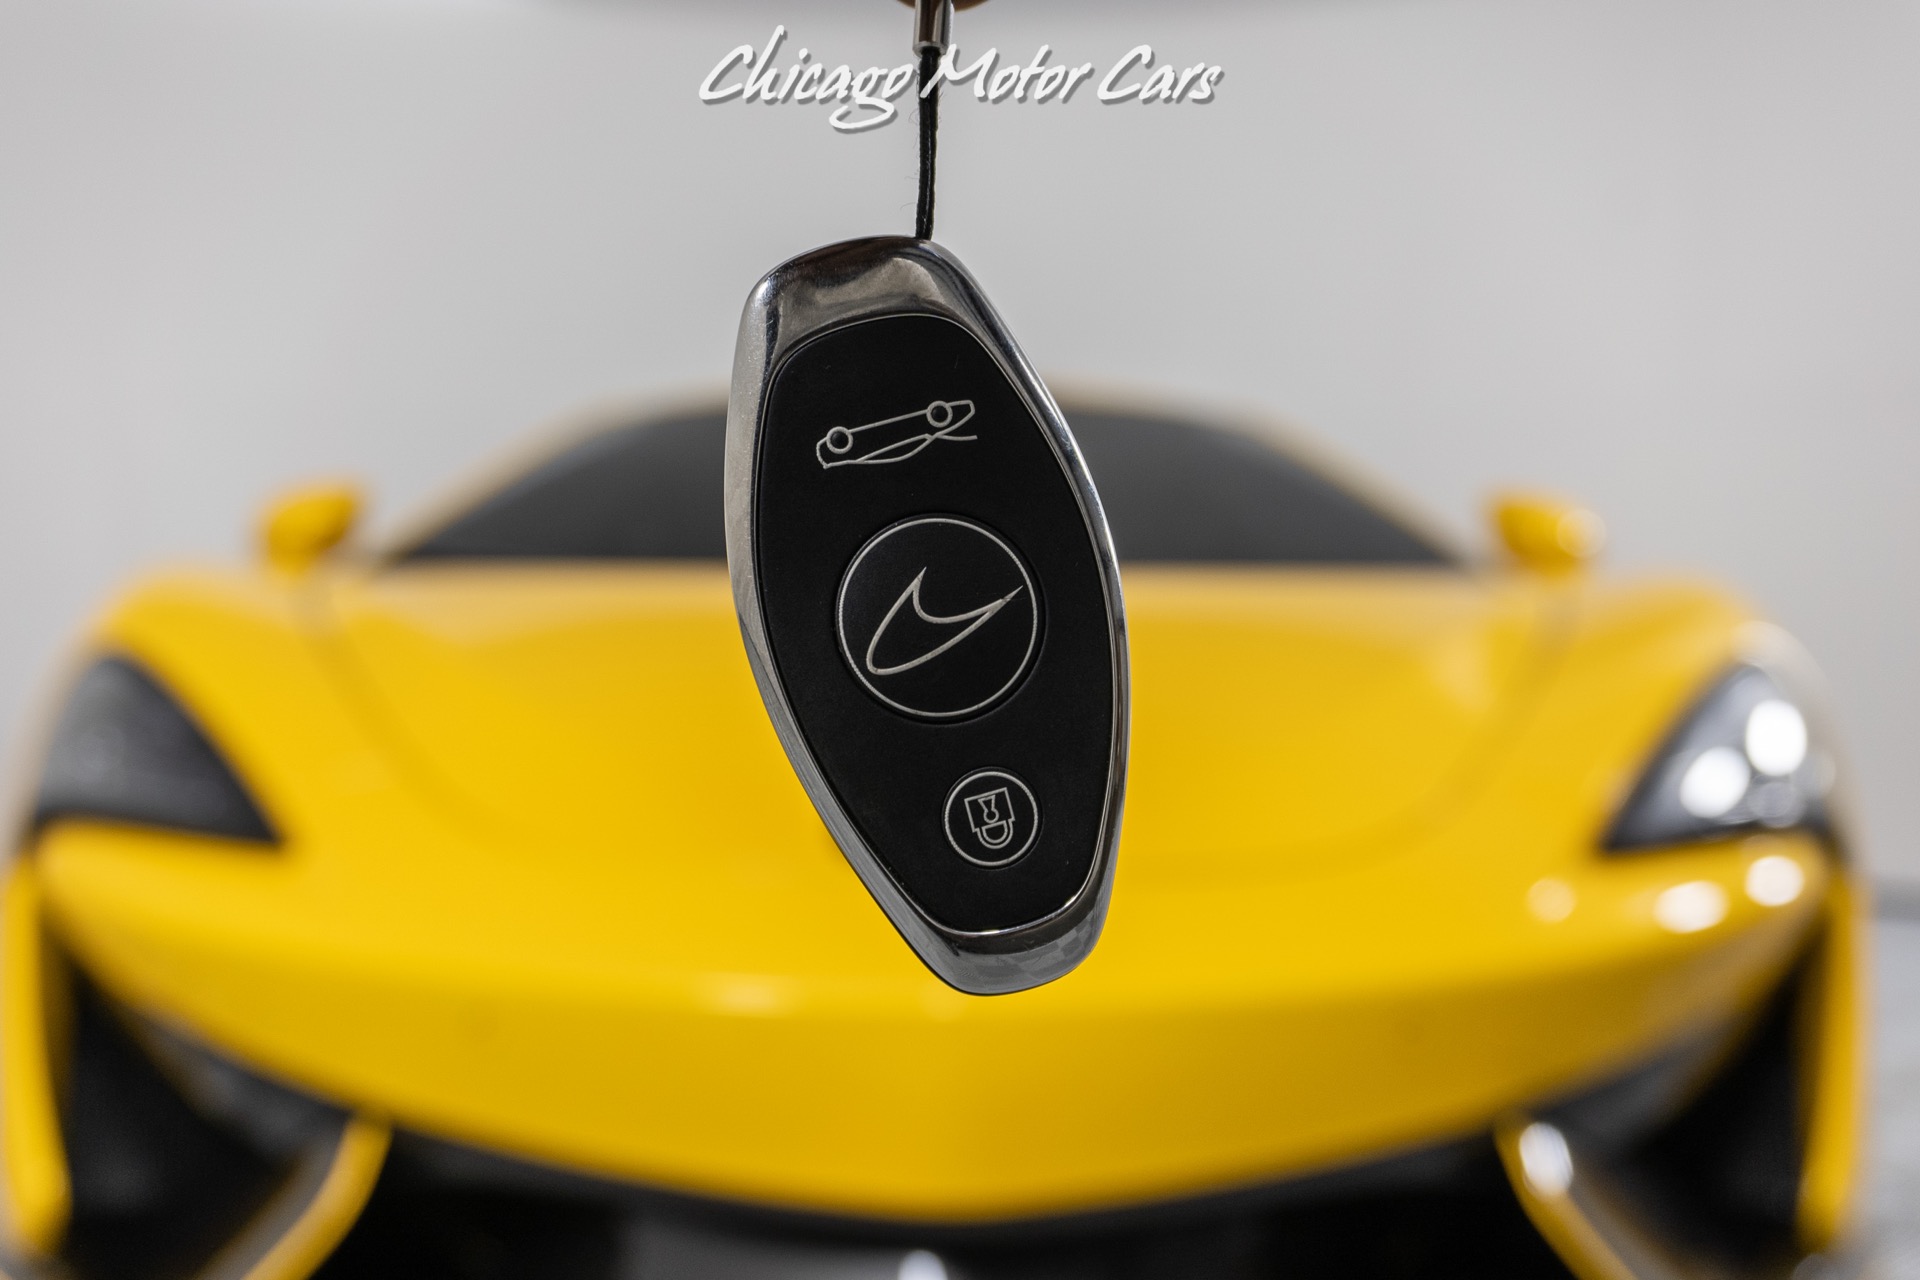 Used-2017-McLaren-570S-COUPE-STUNNING-VOLCANO-YELLOW-LUXURY-PACK-CARBON-FIBER-INTERIOR-ONLY-12K-MILES